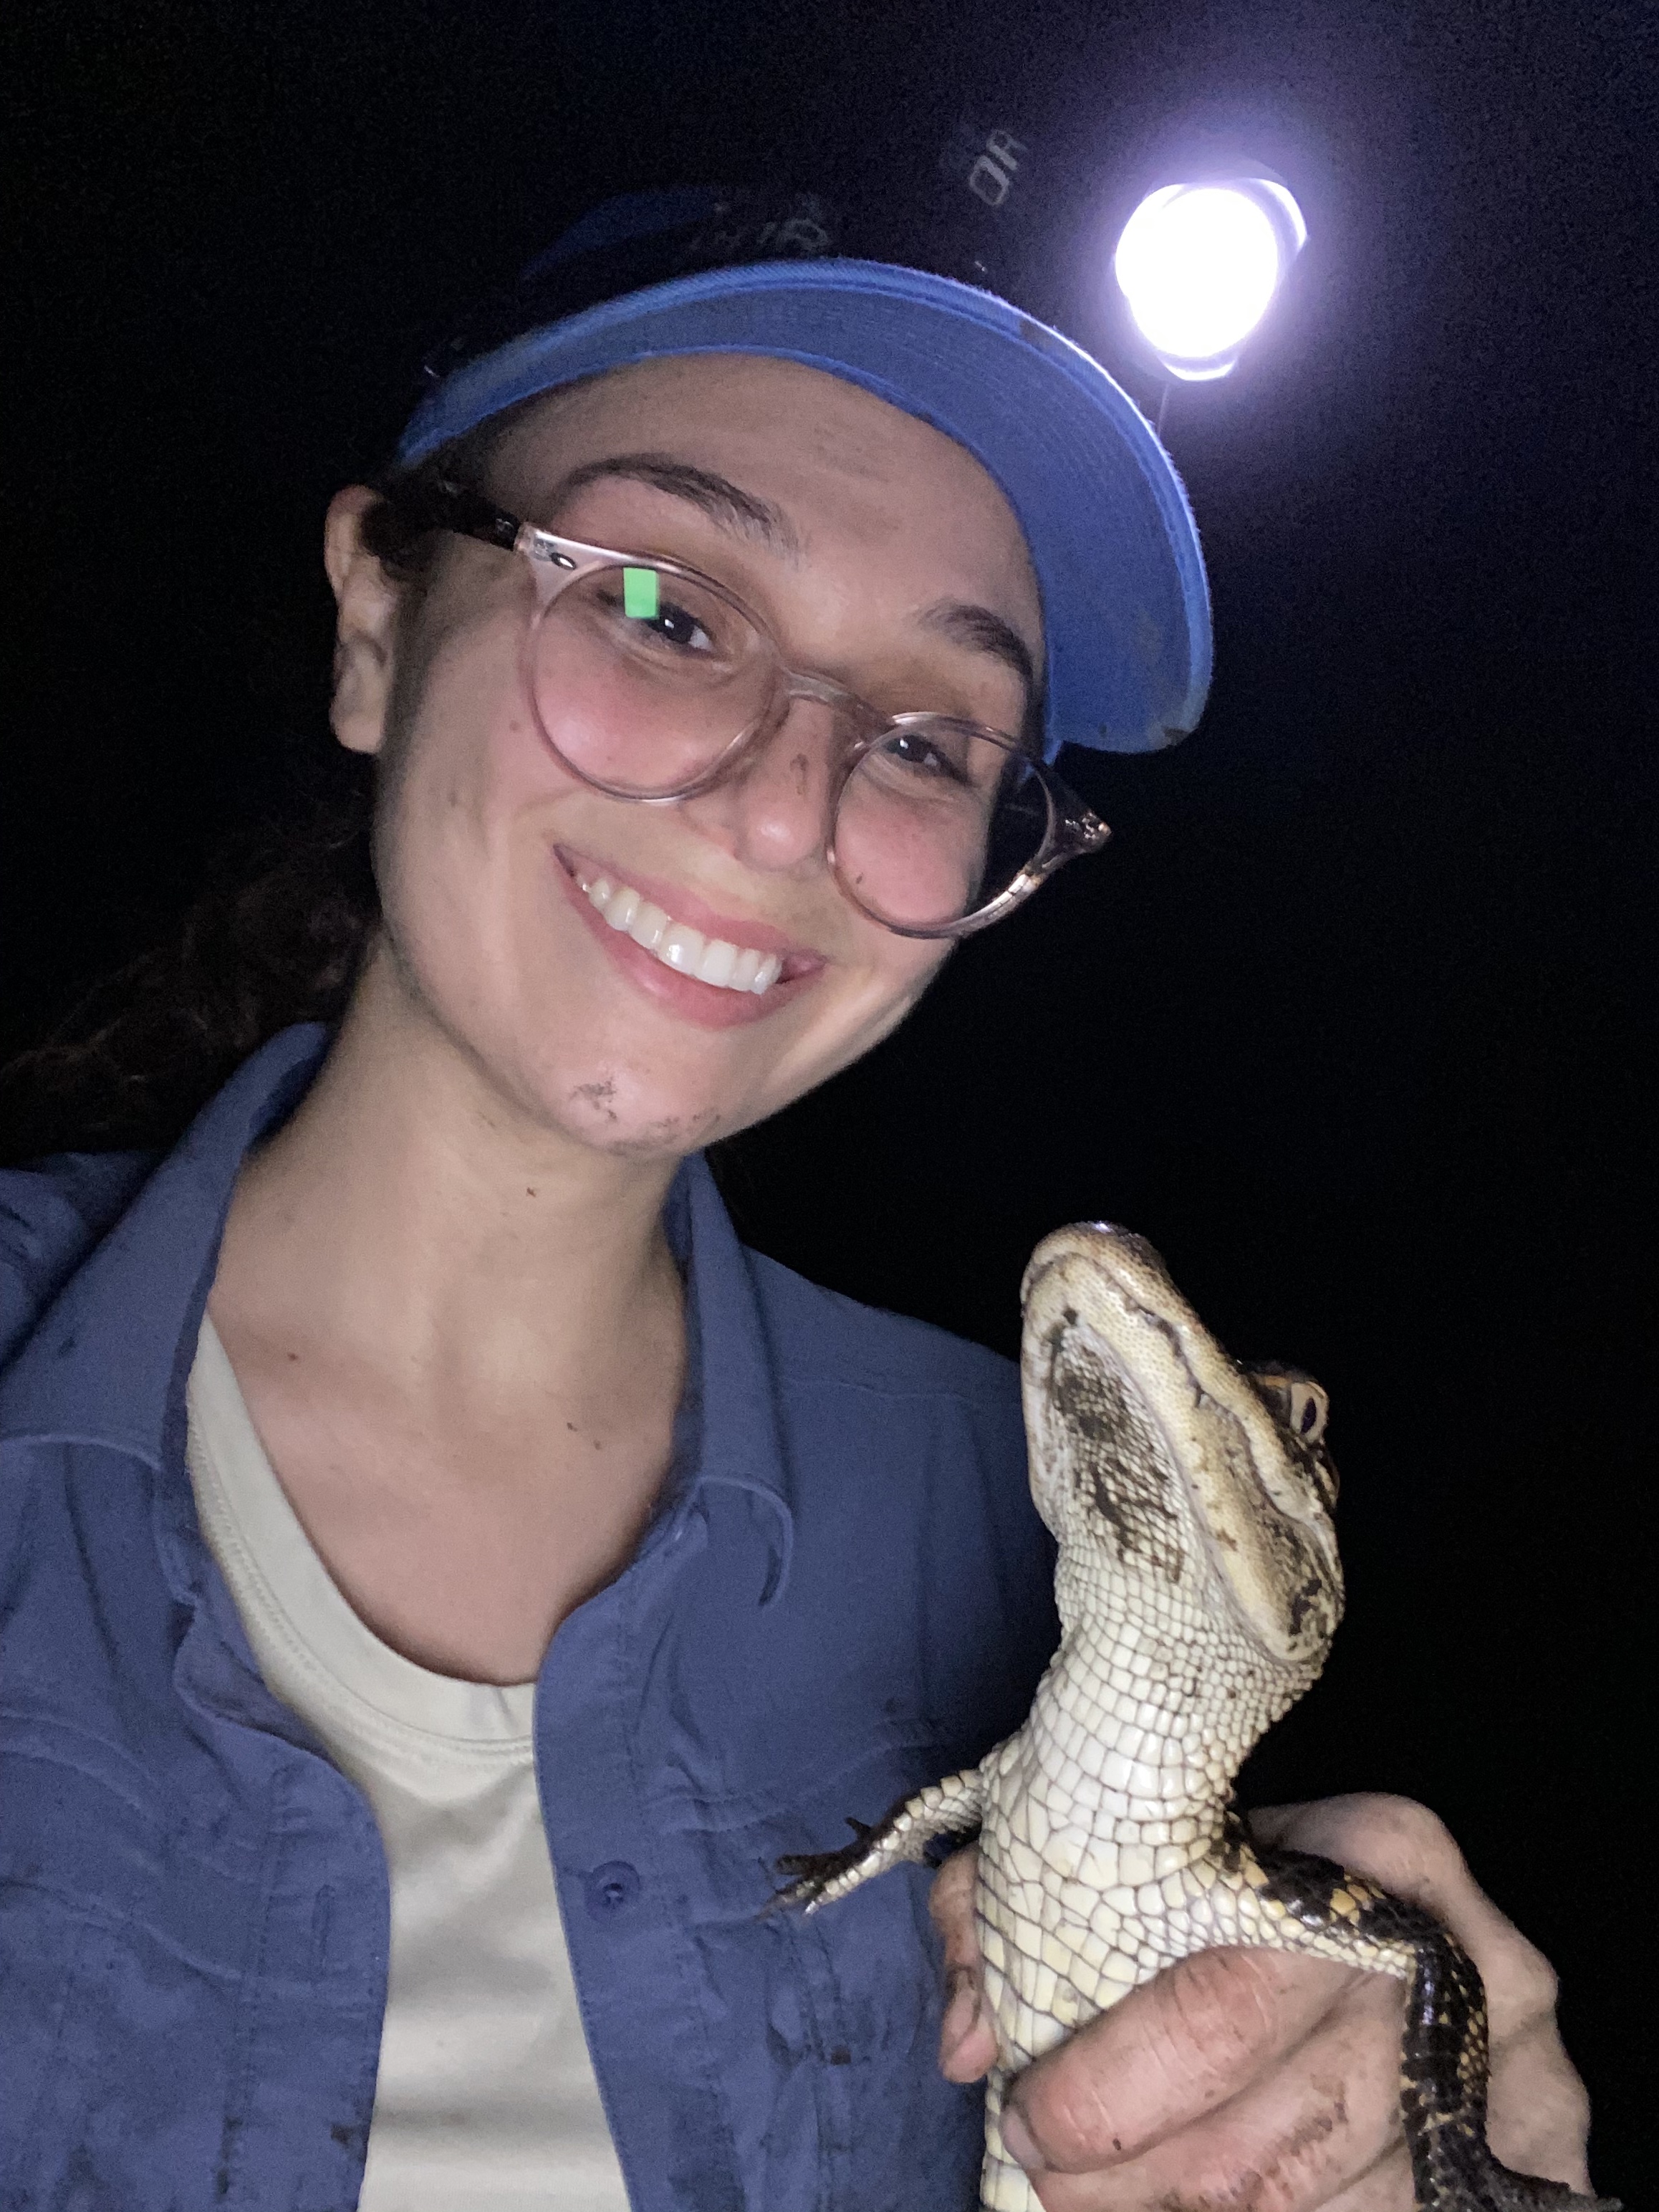 Scientist holds her subject, a baby alligator, and smiles at the camera.